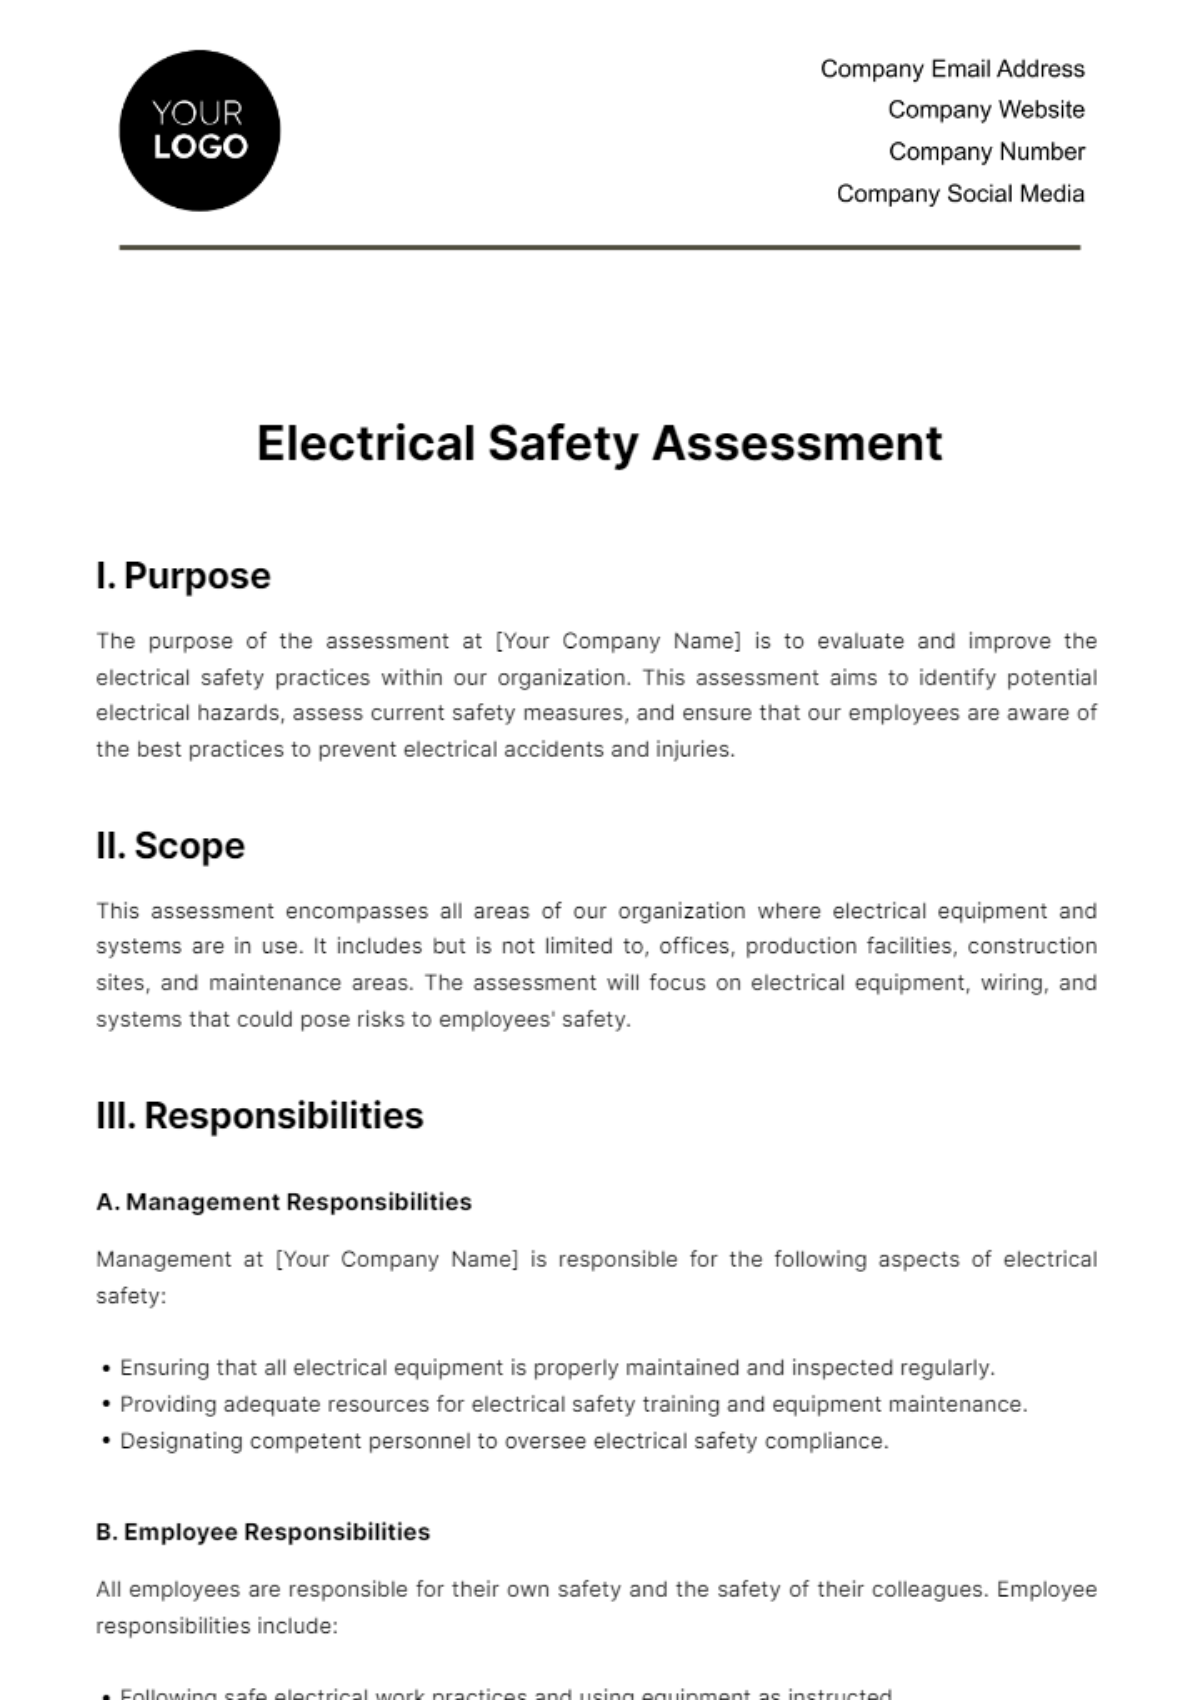 Electrical Safety Assessment HR Template